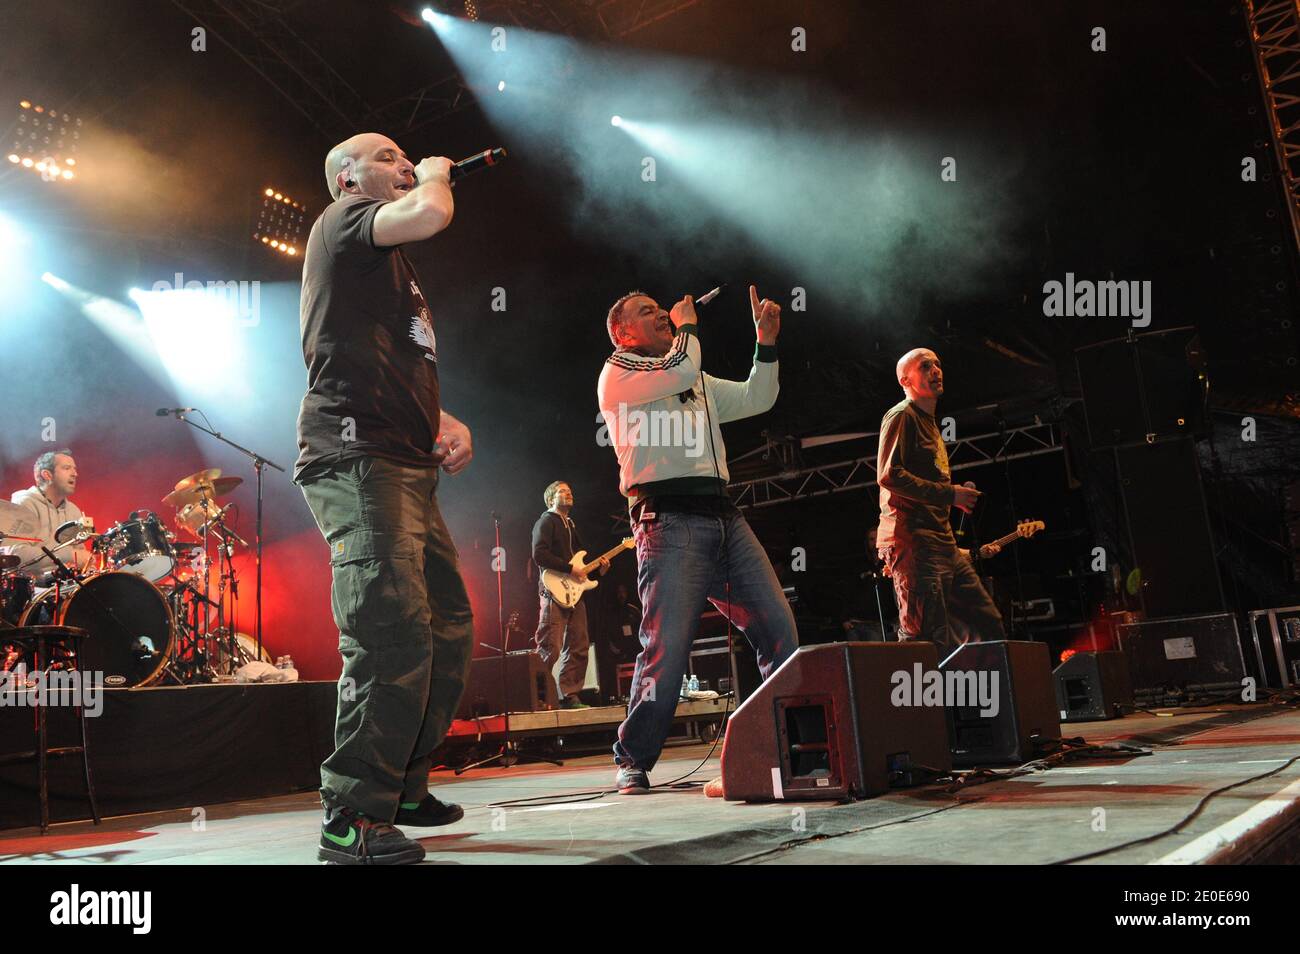 French group Zebda members (L-R : Hakim Amokrane, Majid Cherfi and Mouss Amokrane) seen on stage as they participate in a concert to support Florange Arcelor Mittal steel workers as they arrive in Paris, France on April 6, 2012, after a 350 kilometers walk, from their factory in Florange to the French capital. Photo by Ammar Abd Rabbo/ABACAPRESS.COM Stock Photo